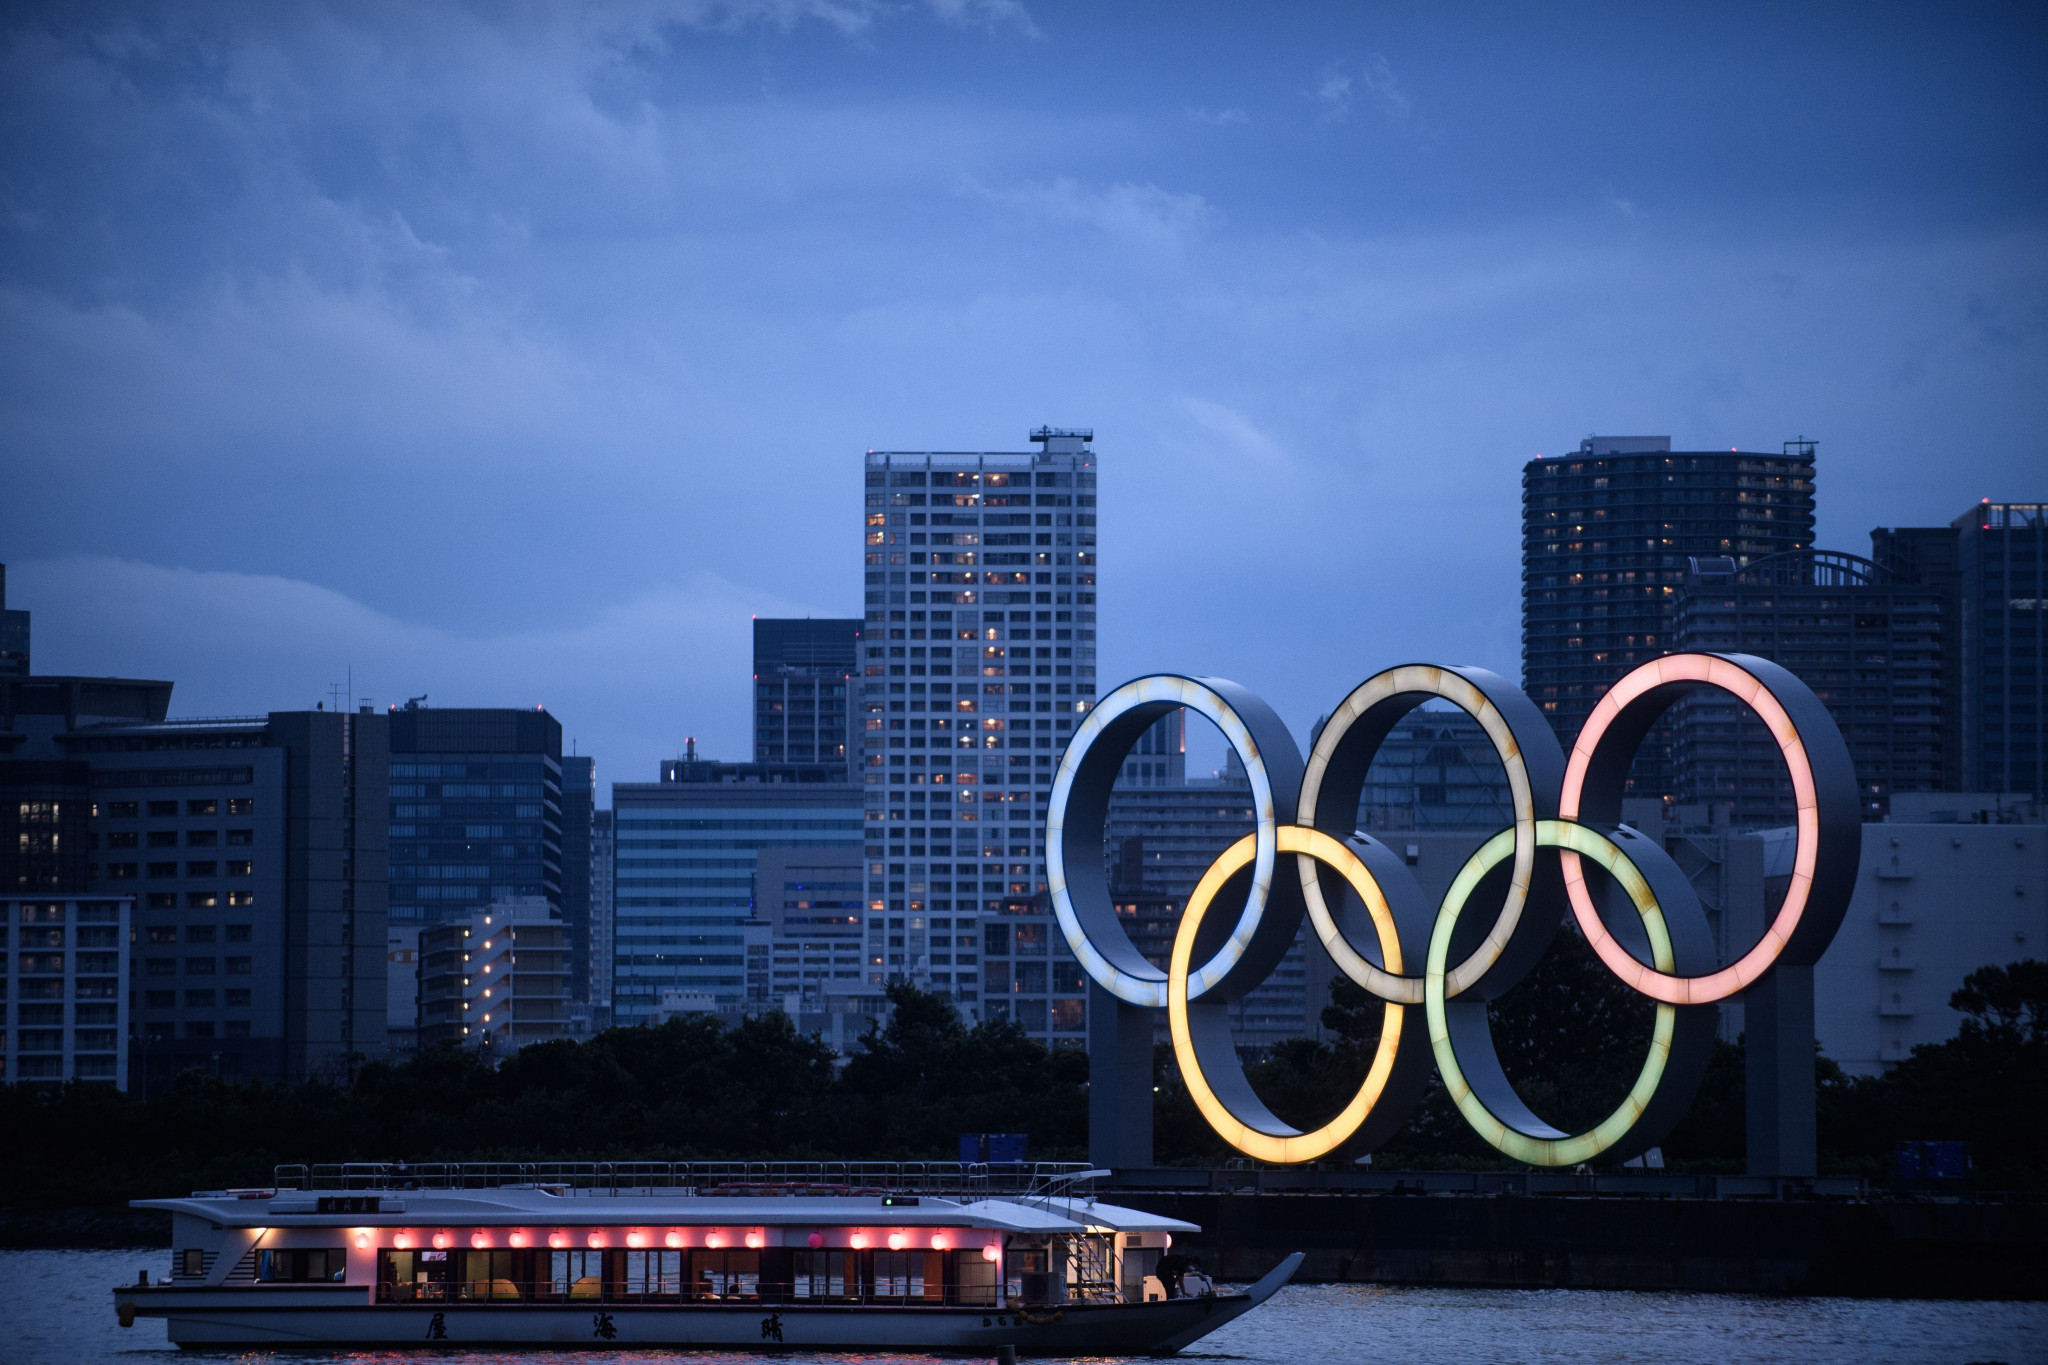 The funding cuts could impact national federations prior to Tokyo 2020 ©Getty Images